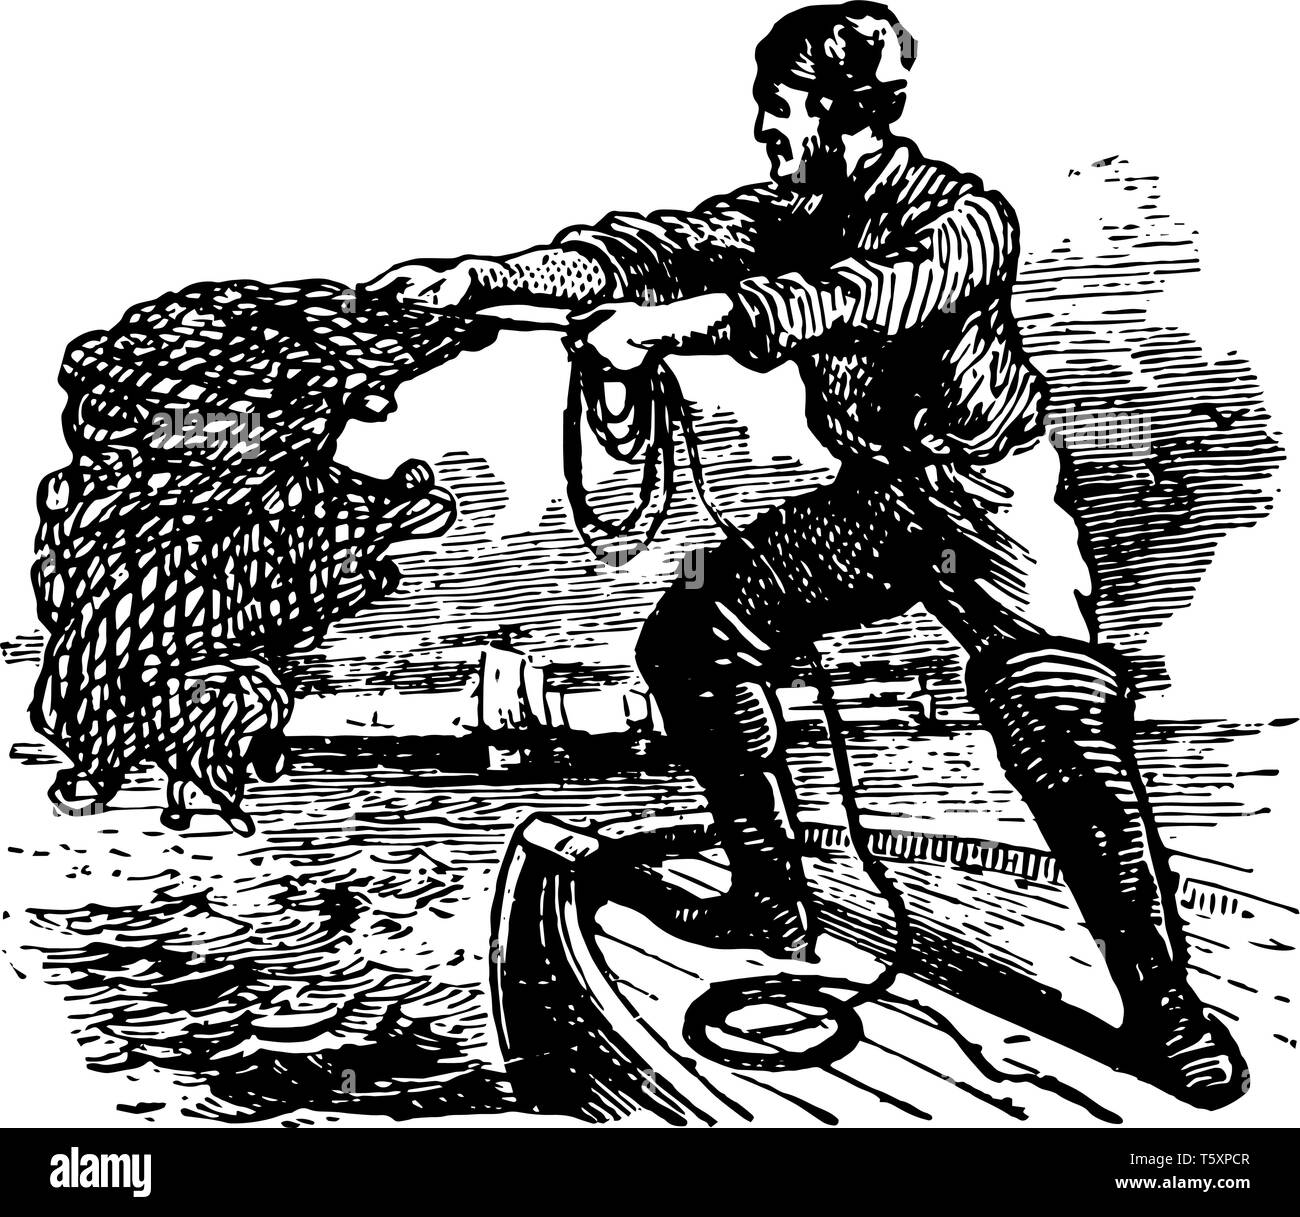 A man throwing cast net into water for fishing vintage line